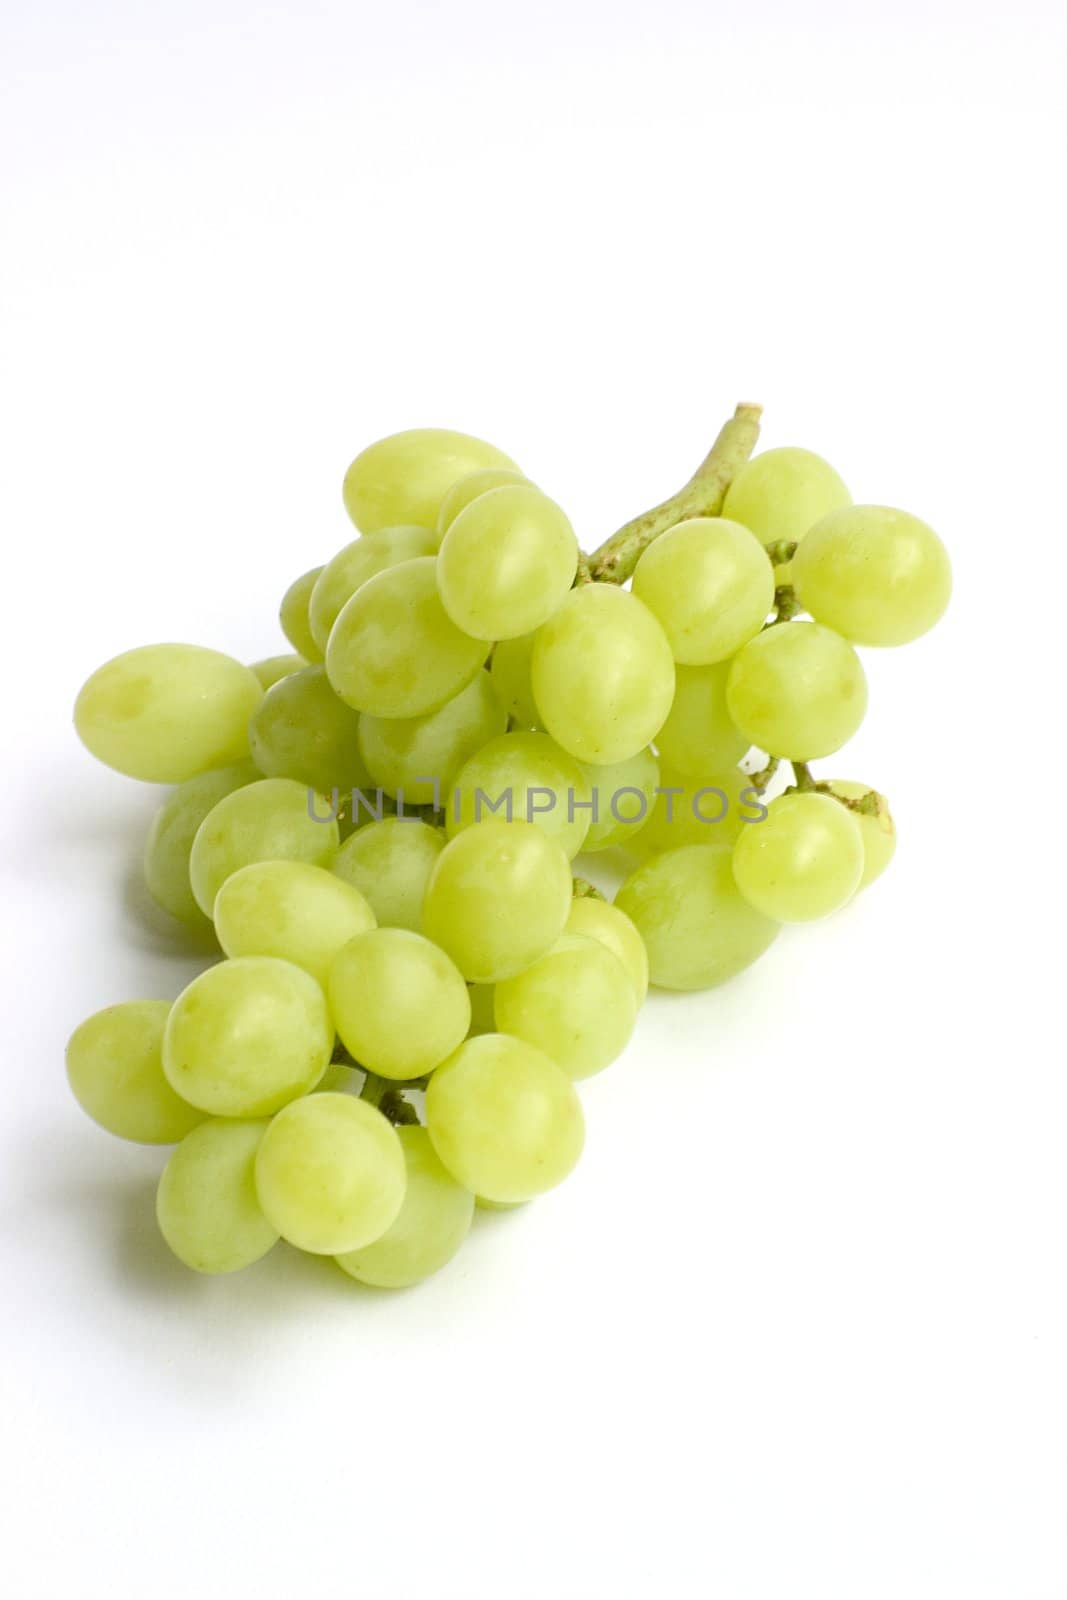 Bunch of green grapes over white background